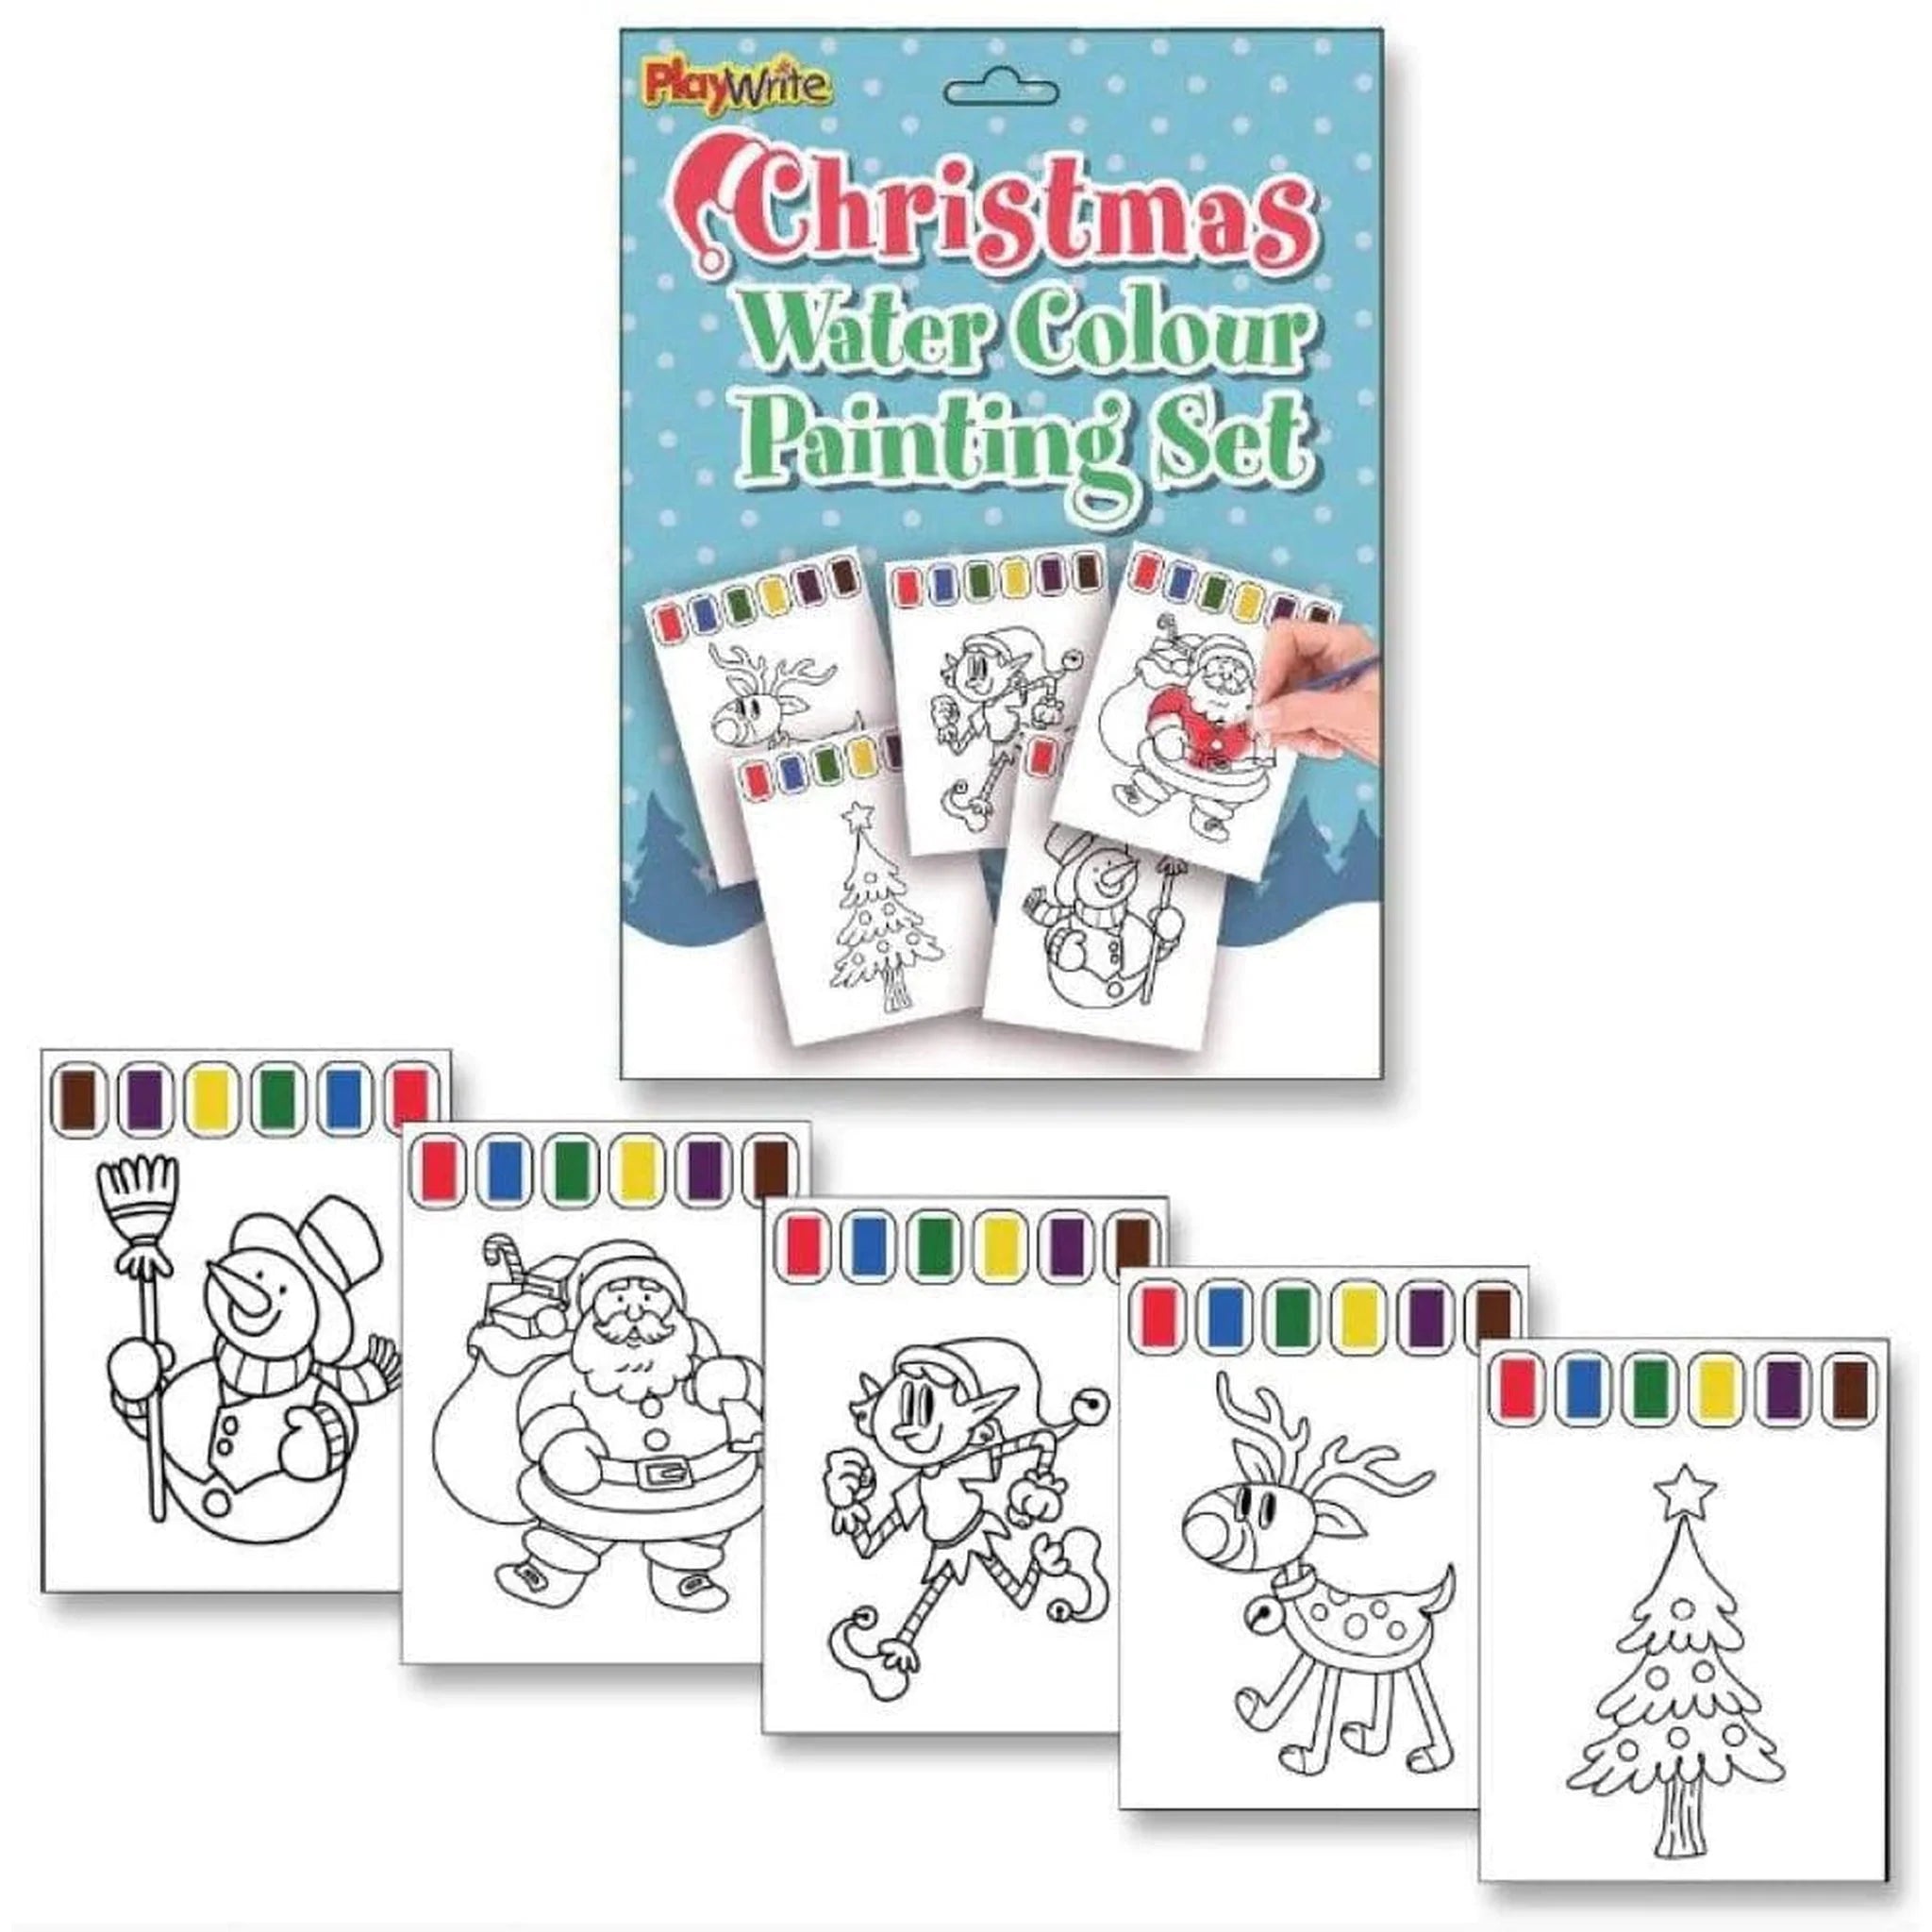 Christmas Watercolour Painting Set - Kids Party Craft